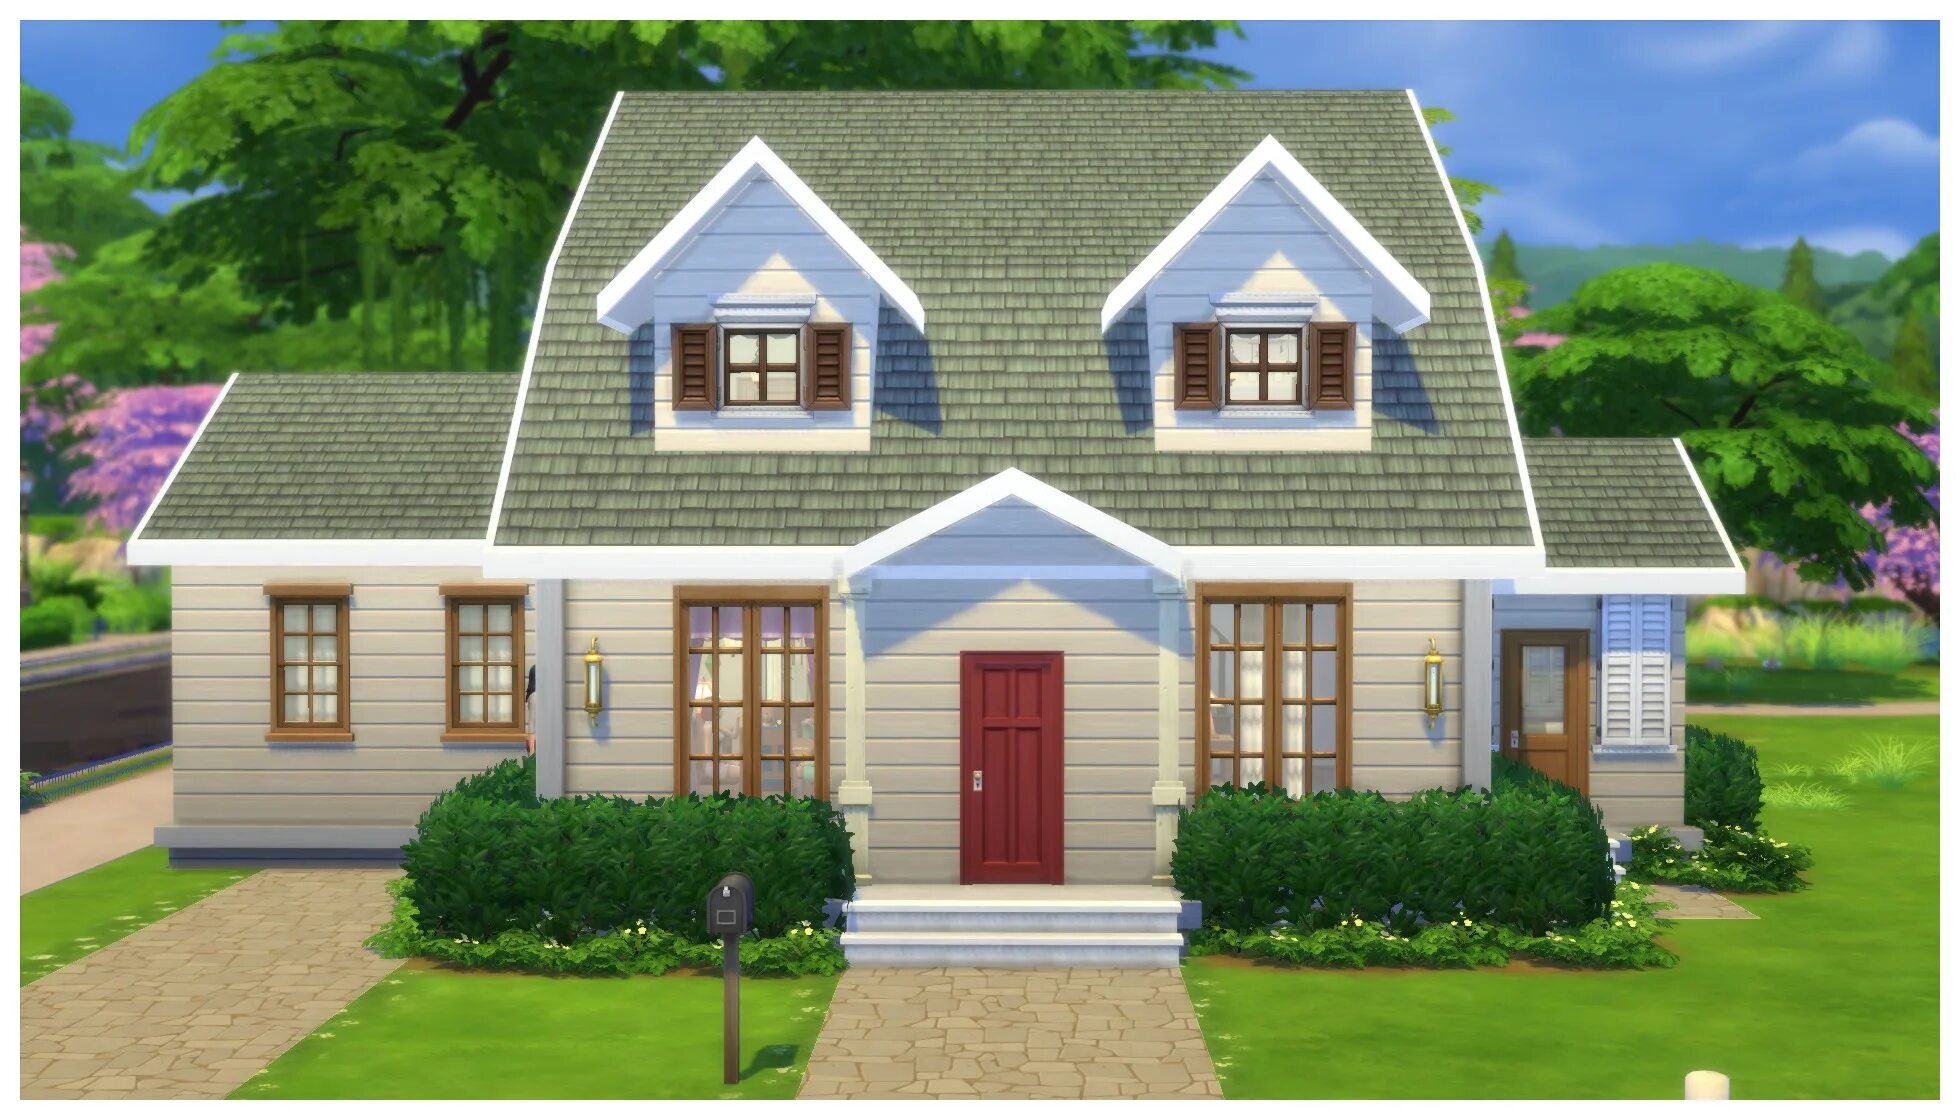 Page дома. Family House SIMS 4. SIMS 4 Suburban House. Small Family House SIMS 4. SIMS 4 Гриффины.